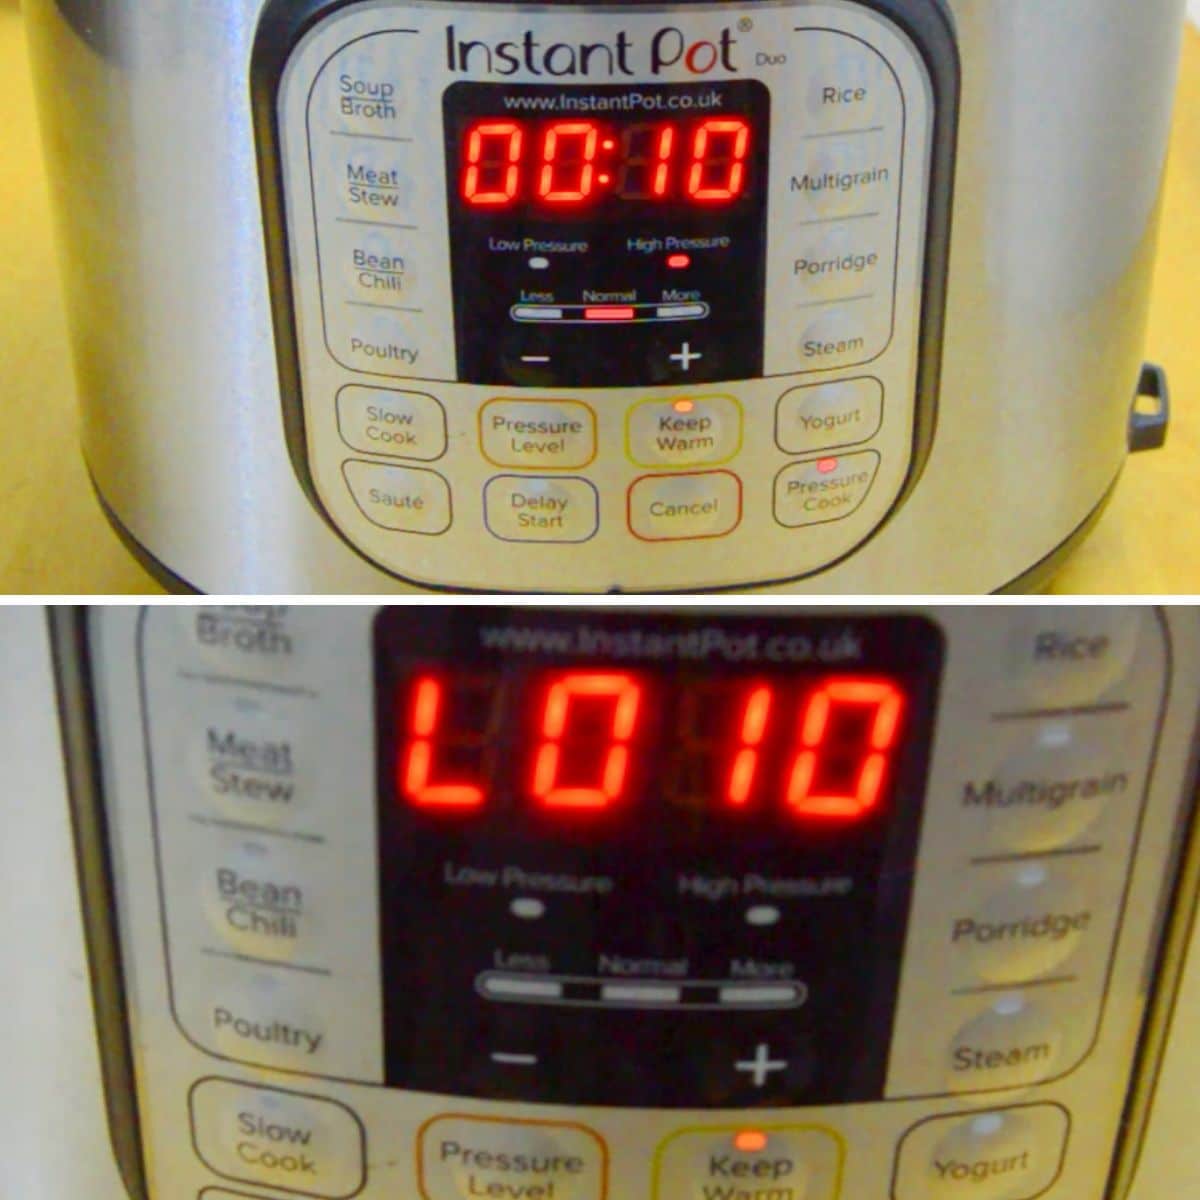 collage of 2 images with top image of instant pot displaying 10 minutes and bottom image displaying L0:10.